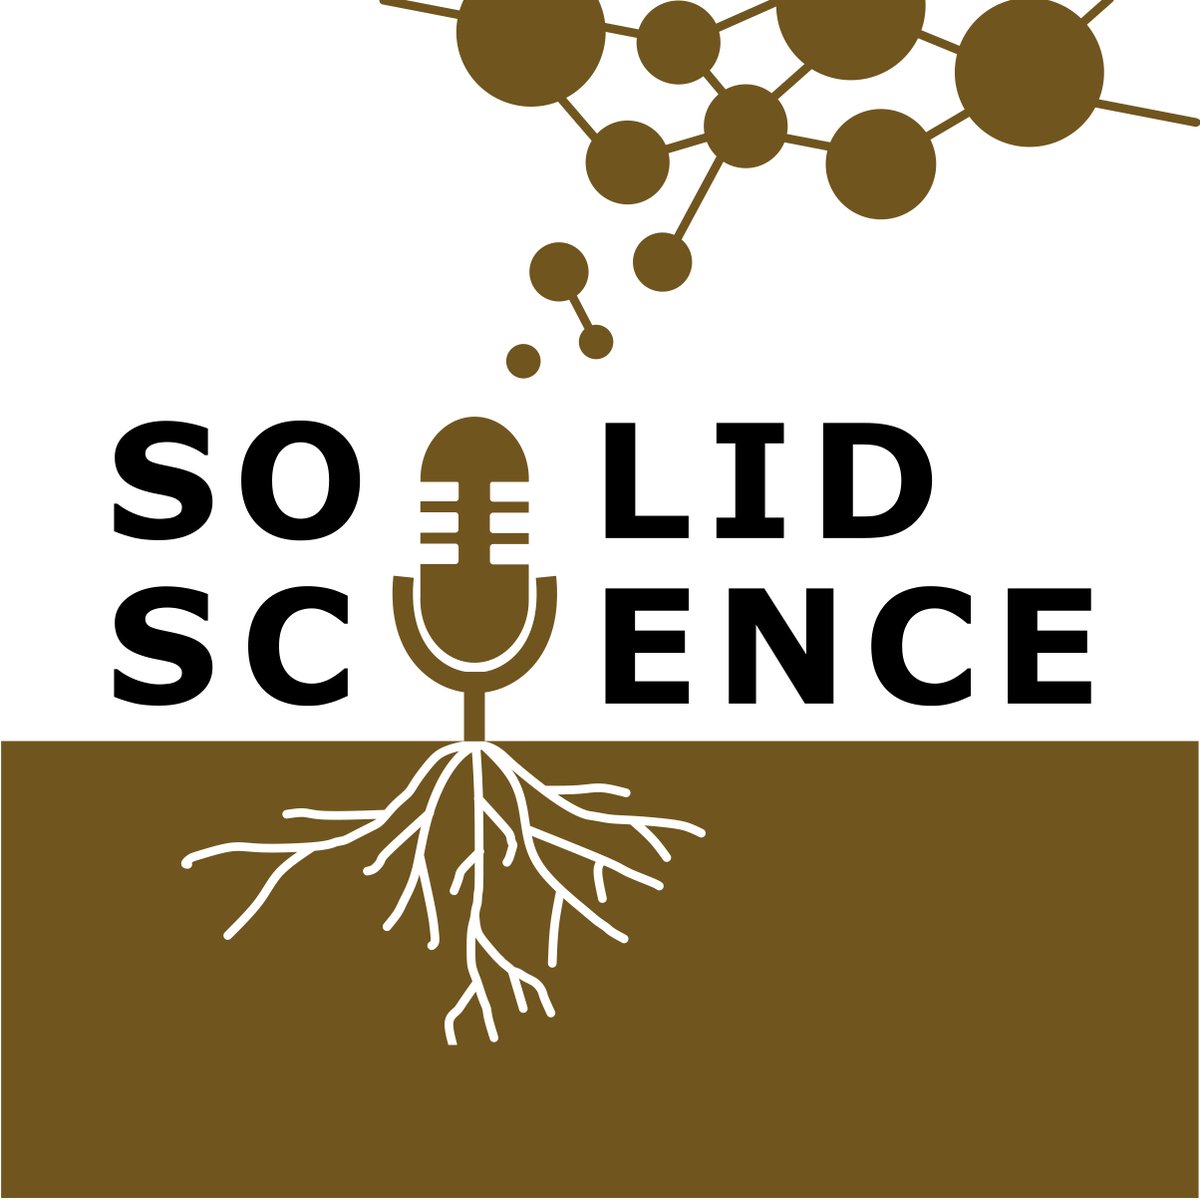 Are you interested in #Science and the #ScienceCommunity ? And how #Knowledge is gathered 🔬 ? Do you have a certain curiosity about #soil 🤓 or don't understand such an affection 🧐 ?

Check out our new #Podcast 'Solid Science' 🎙️ ! Please let us know what you think about it!